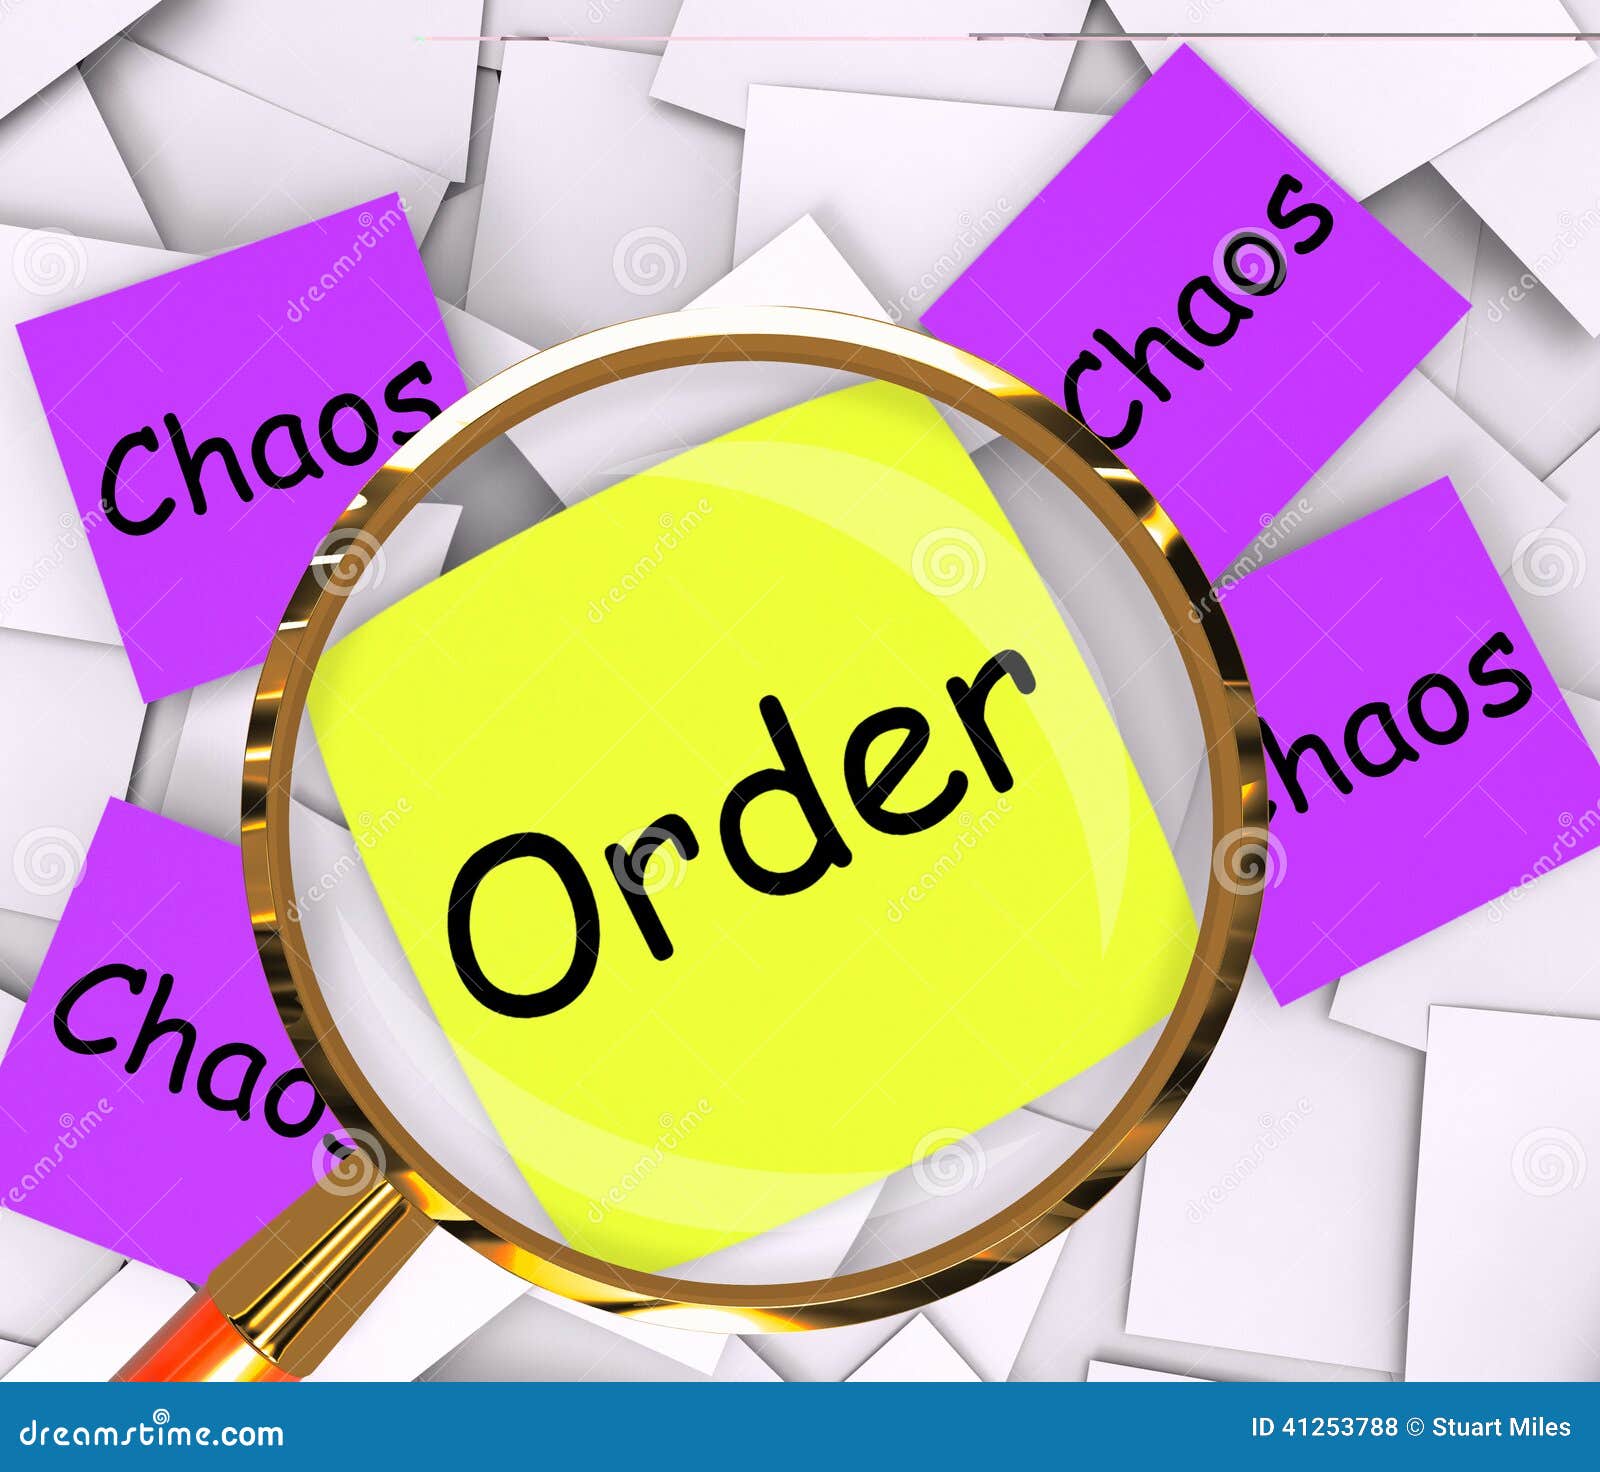 Essay on order and chaos